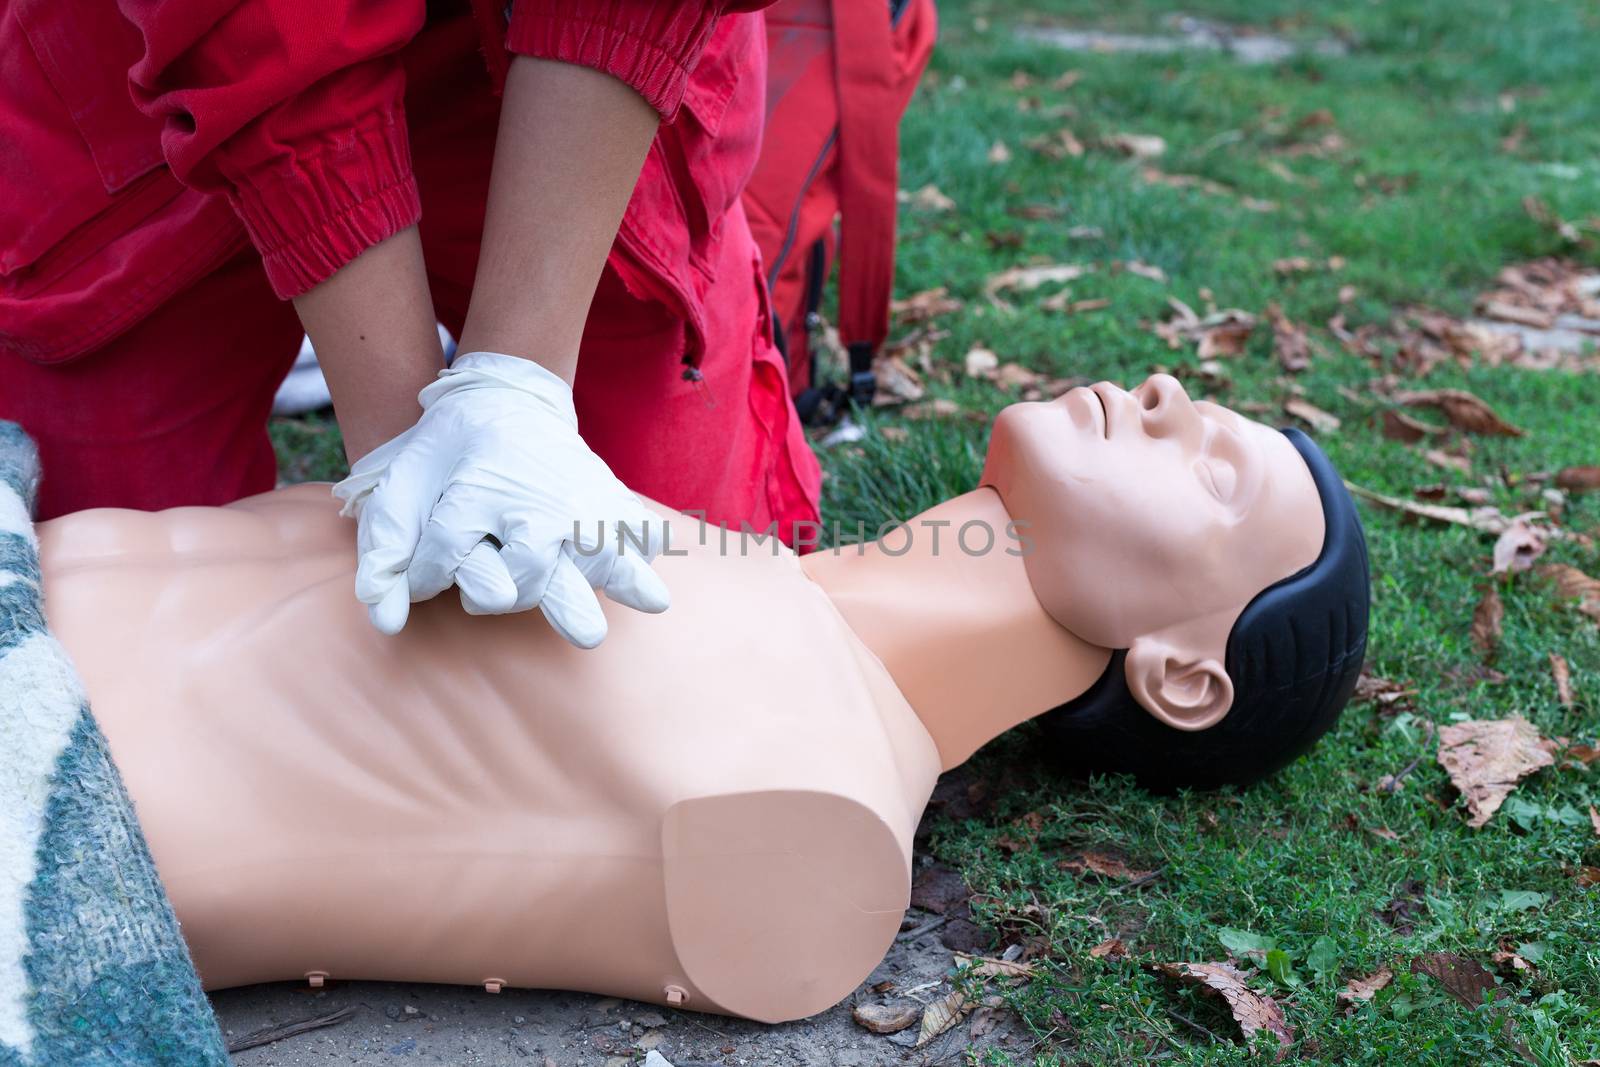 Paramedic demonstrate Cardiopulmonary resuscitation - CPR on dummy by wellphoto